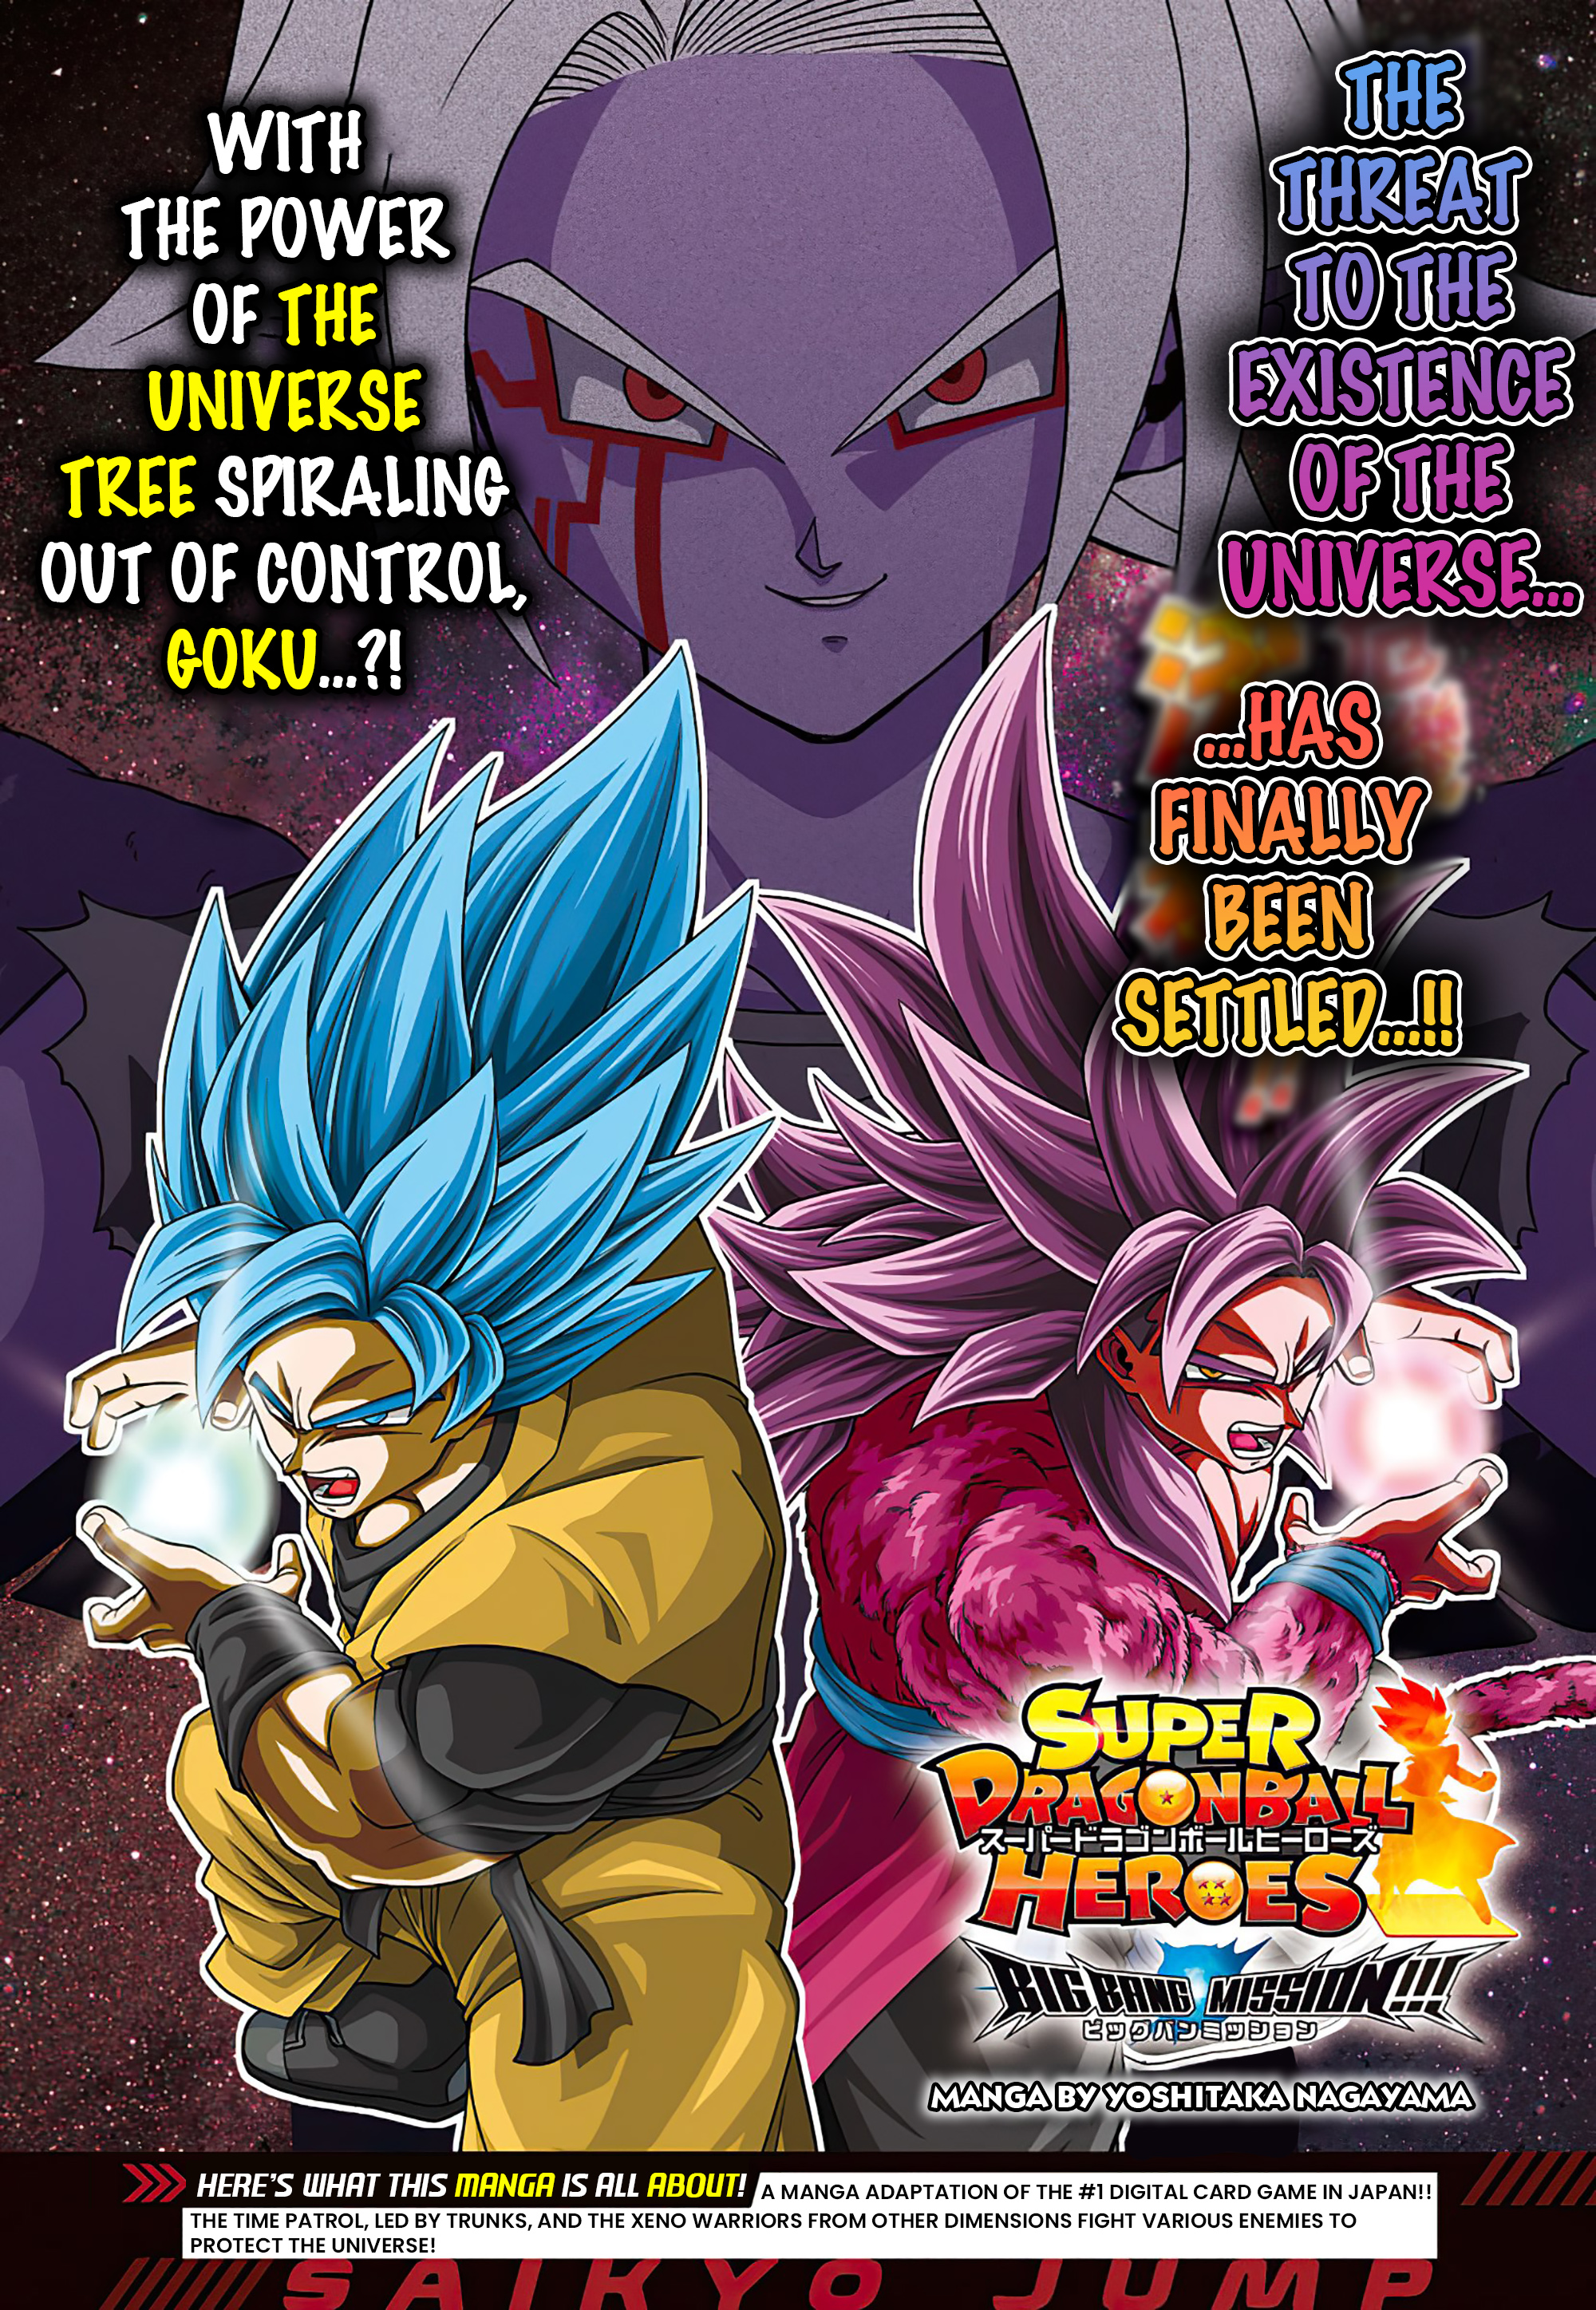 Super Dragon Ball Heroes: Big Bang Mission! Vol.4 Chapter 15: The Threat To The Existence Of The Universe Has Finally Been Settled...!! - Picture 1